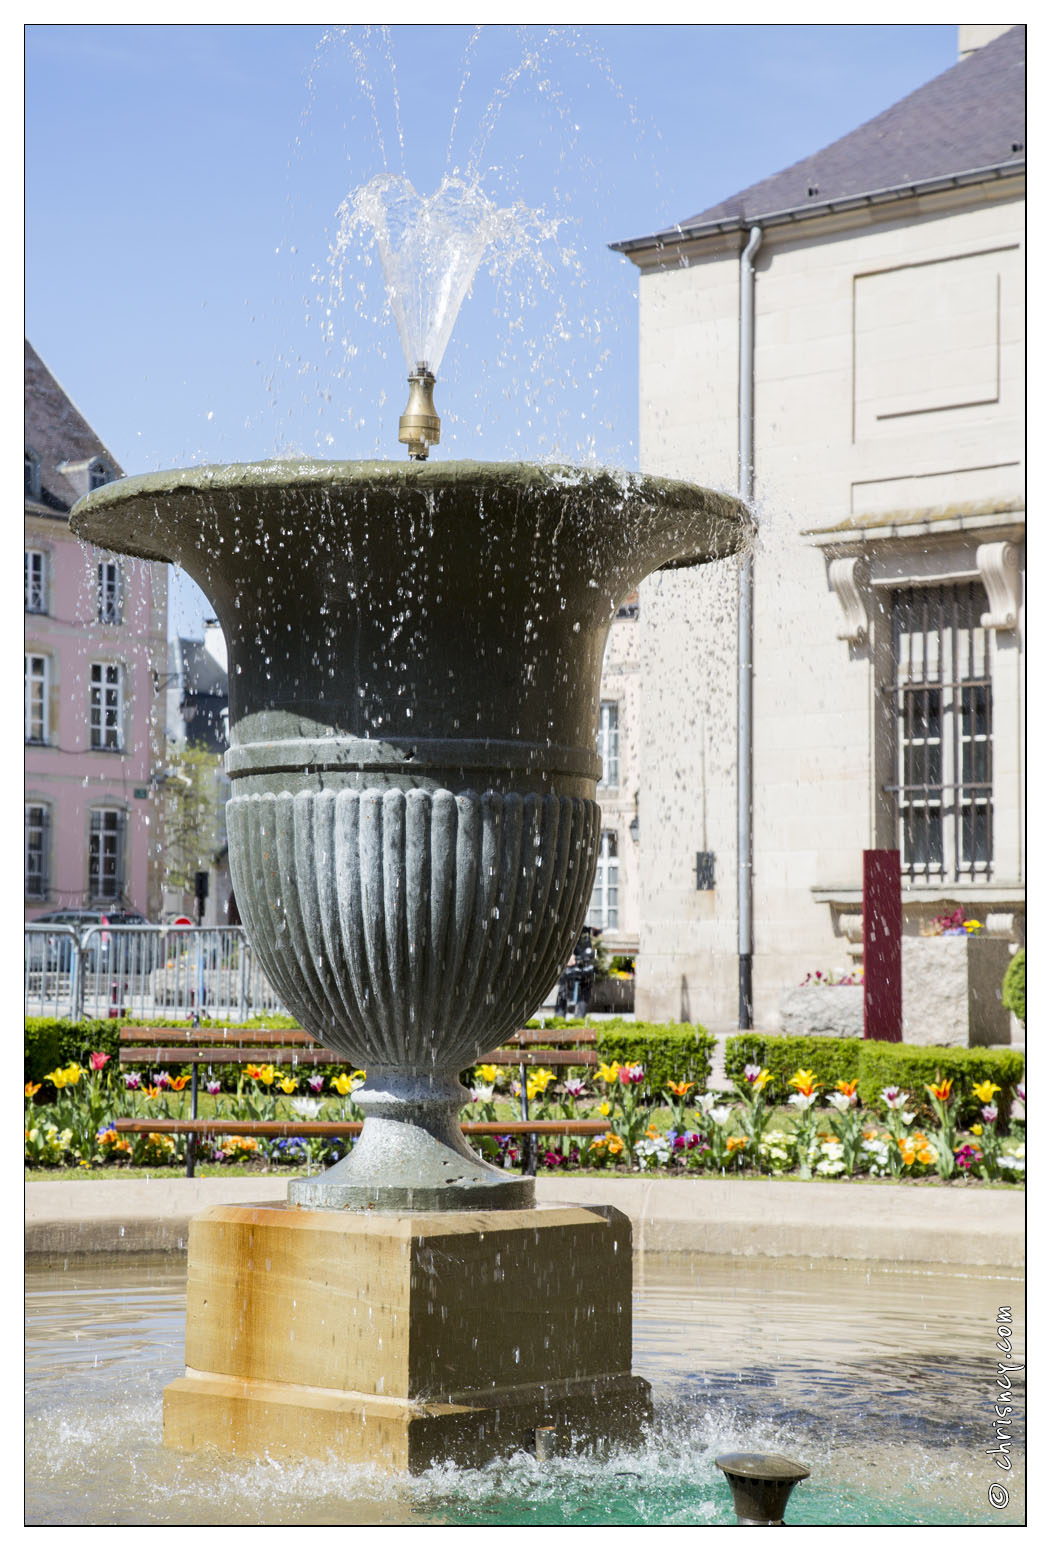 20140411-05_8814-Remiremont_Fontaine.jpg